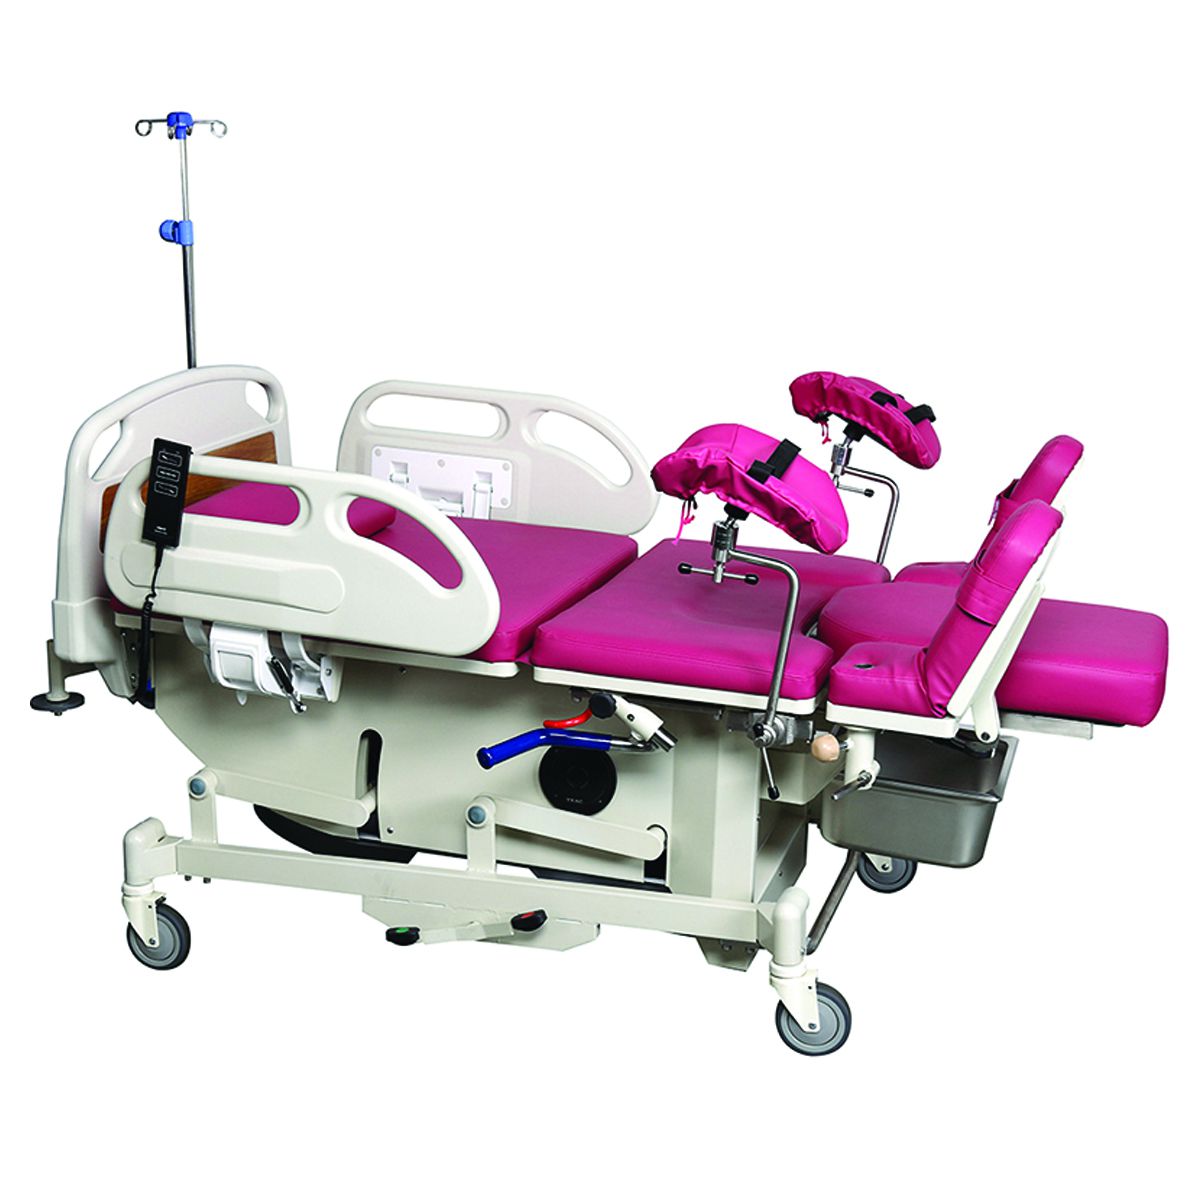 ELECTRIC OBSTETRIC BED